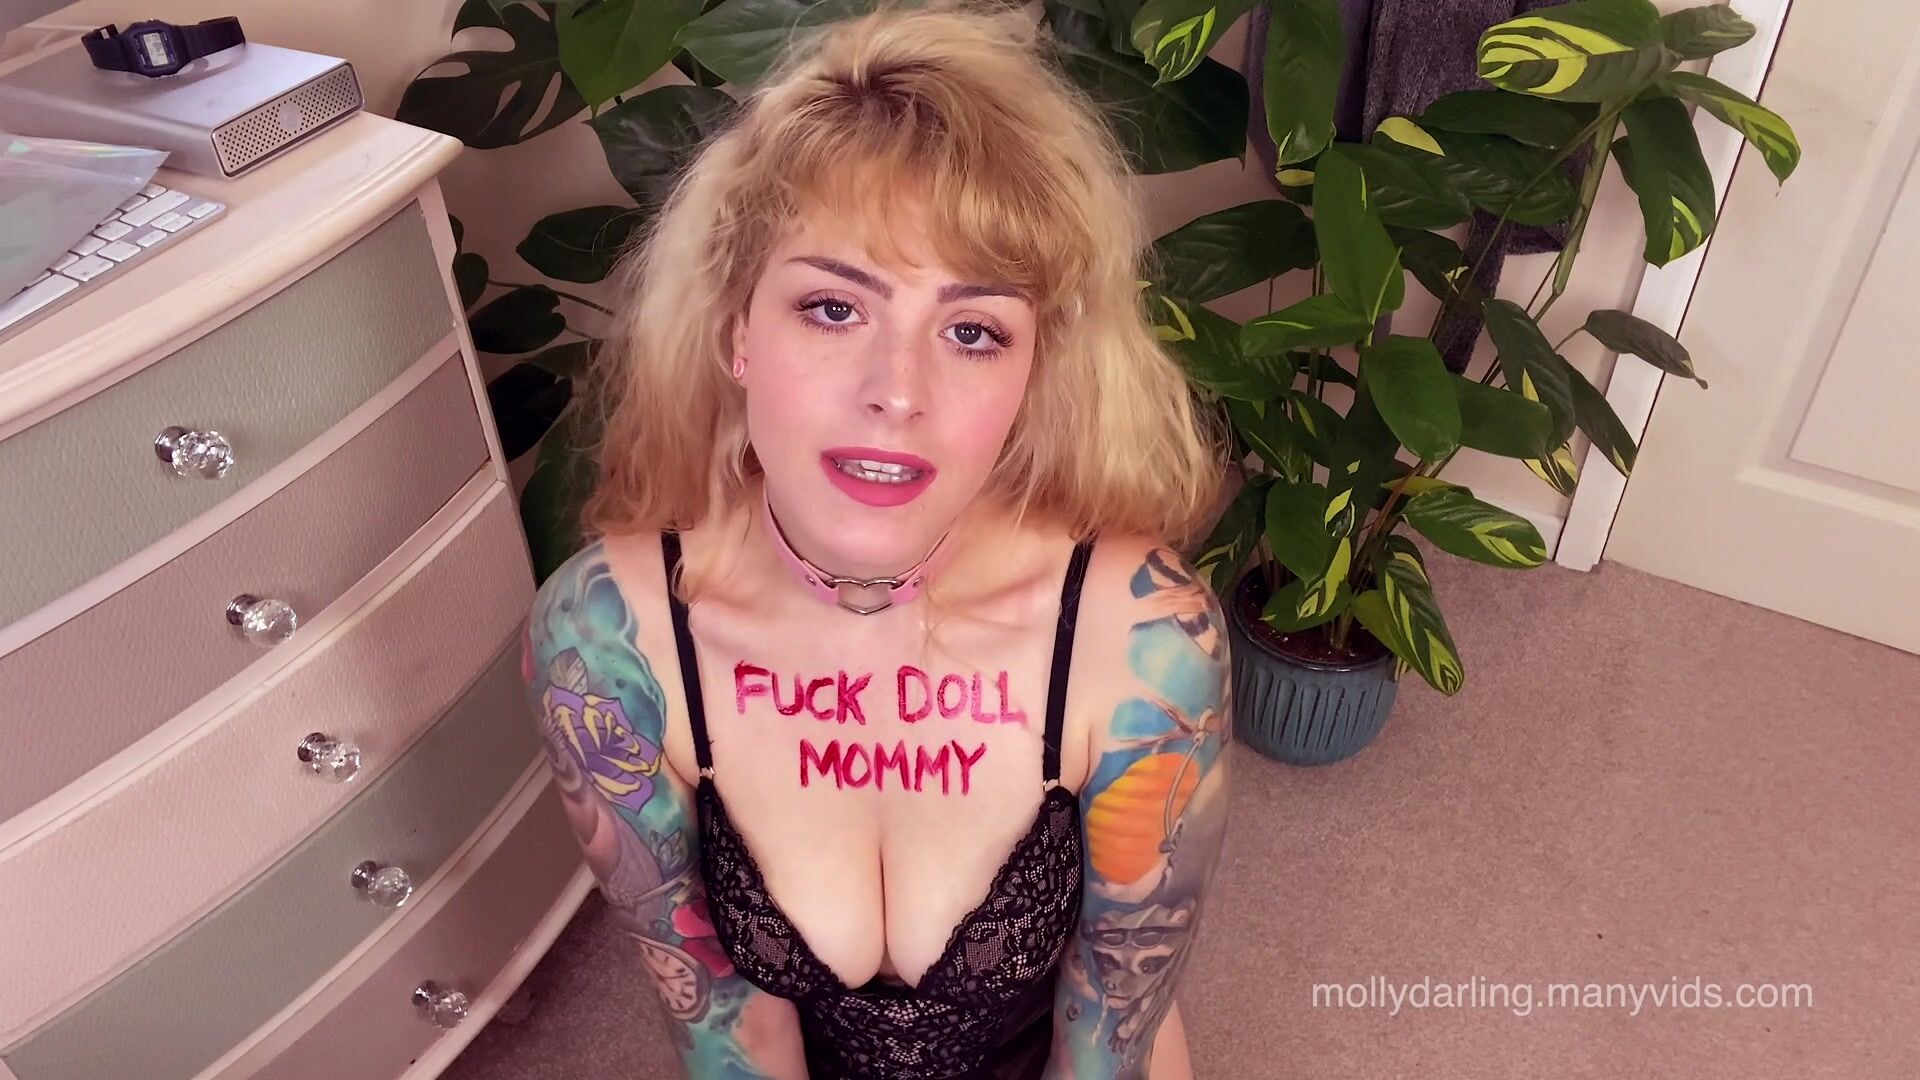 Transforming Mommy Into Your Fuckdoll